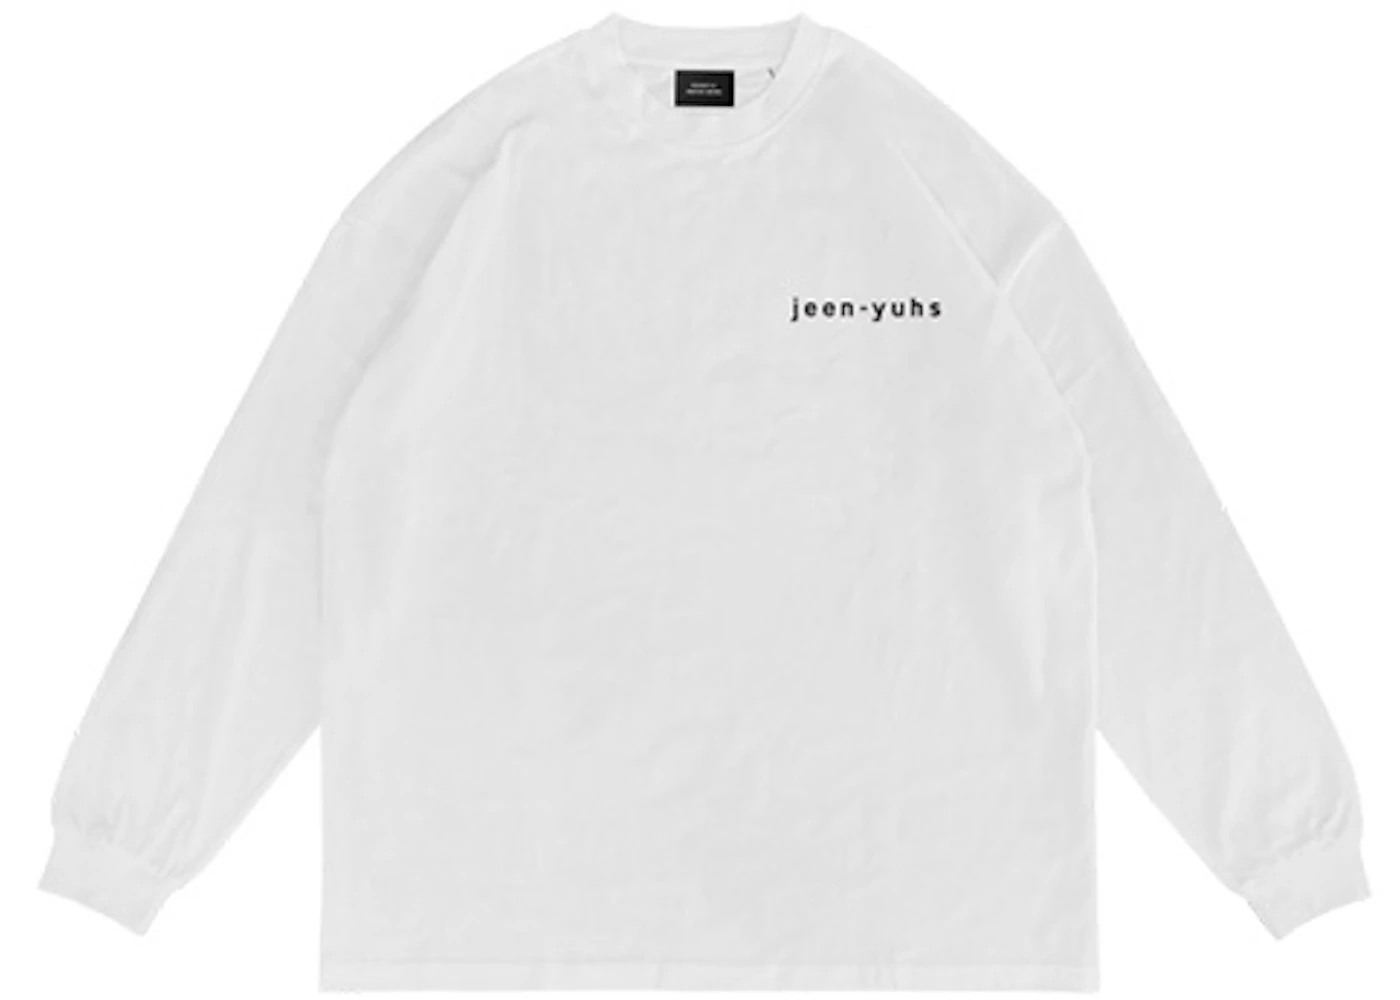 Kanye West Jeen-Yuhs L/S Tee White Men's - SS22 - US